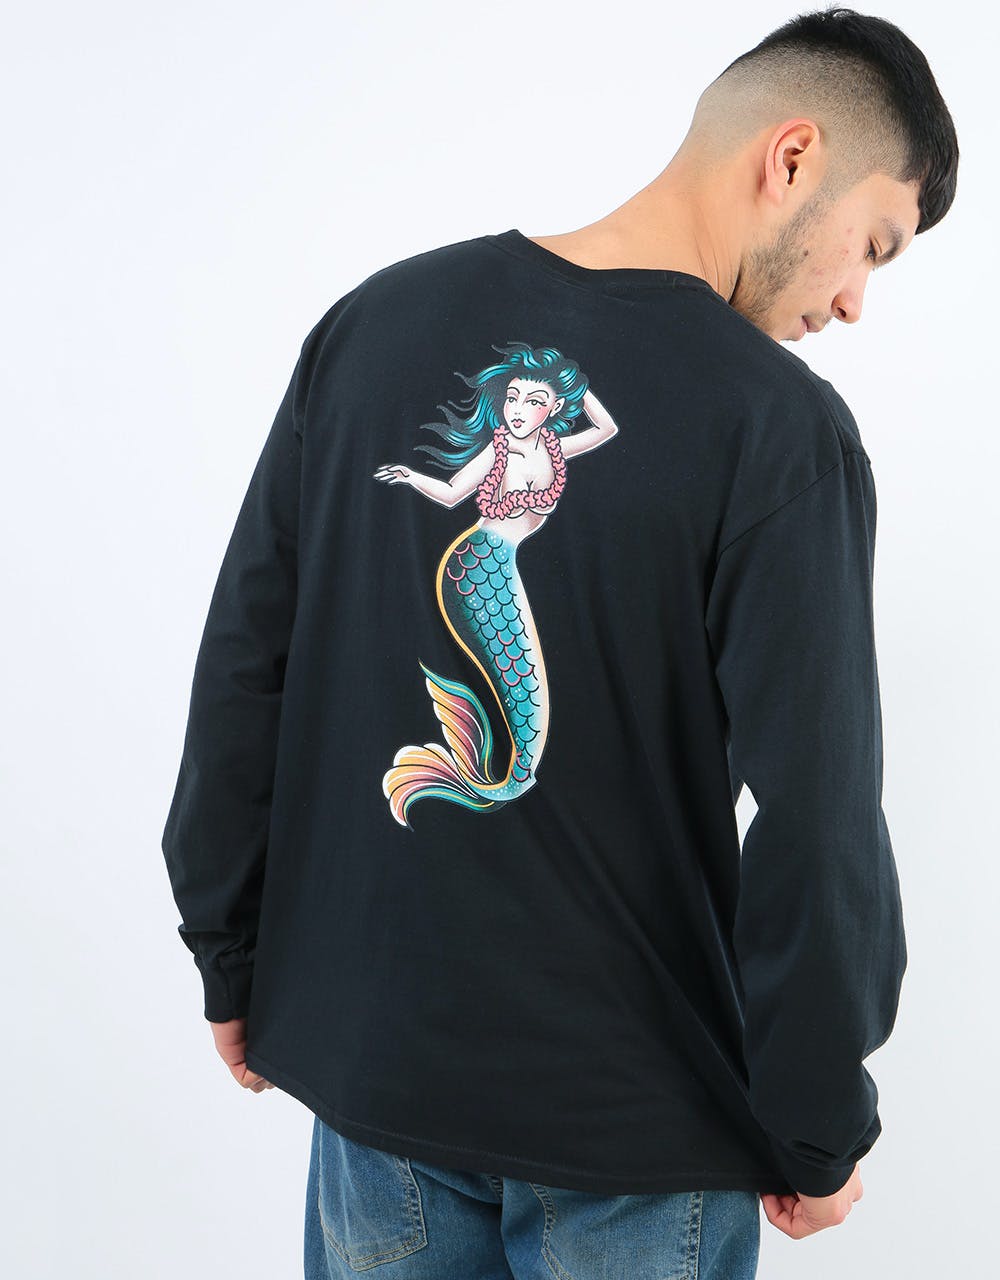 Scarred For Life Ocean Nymph LS T-Shirt - Black